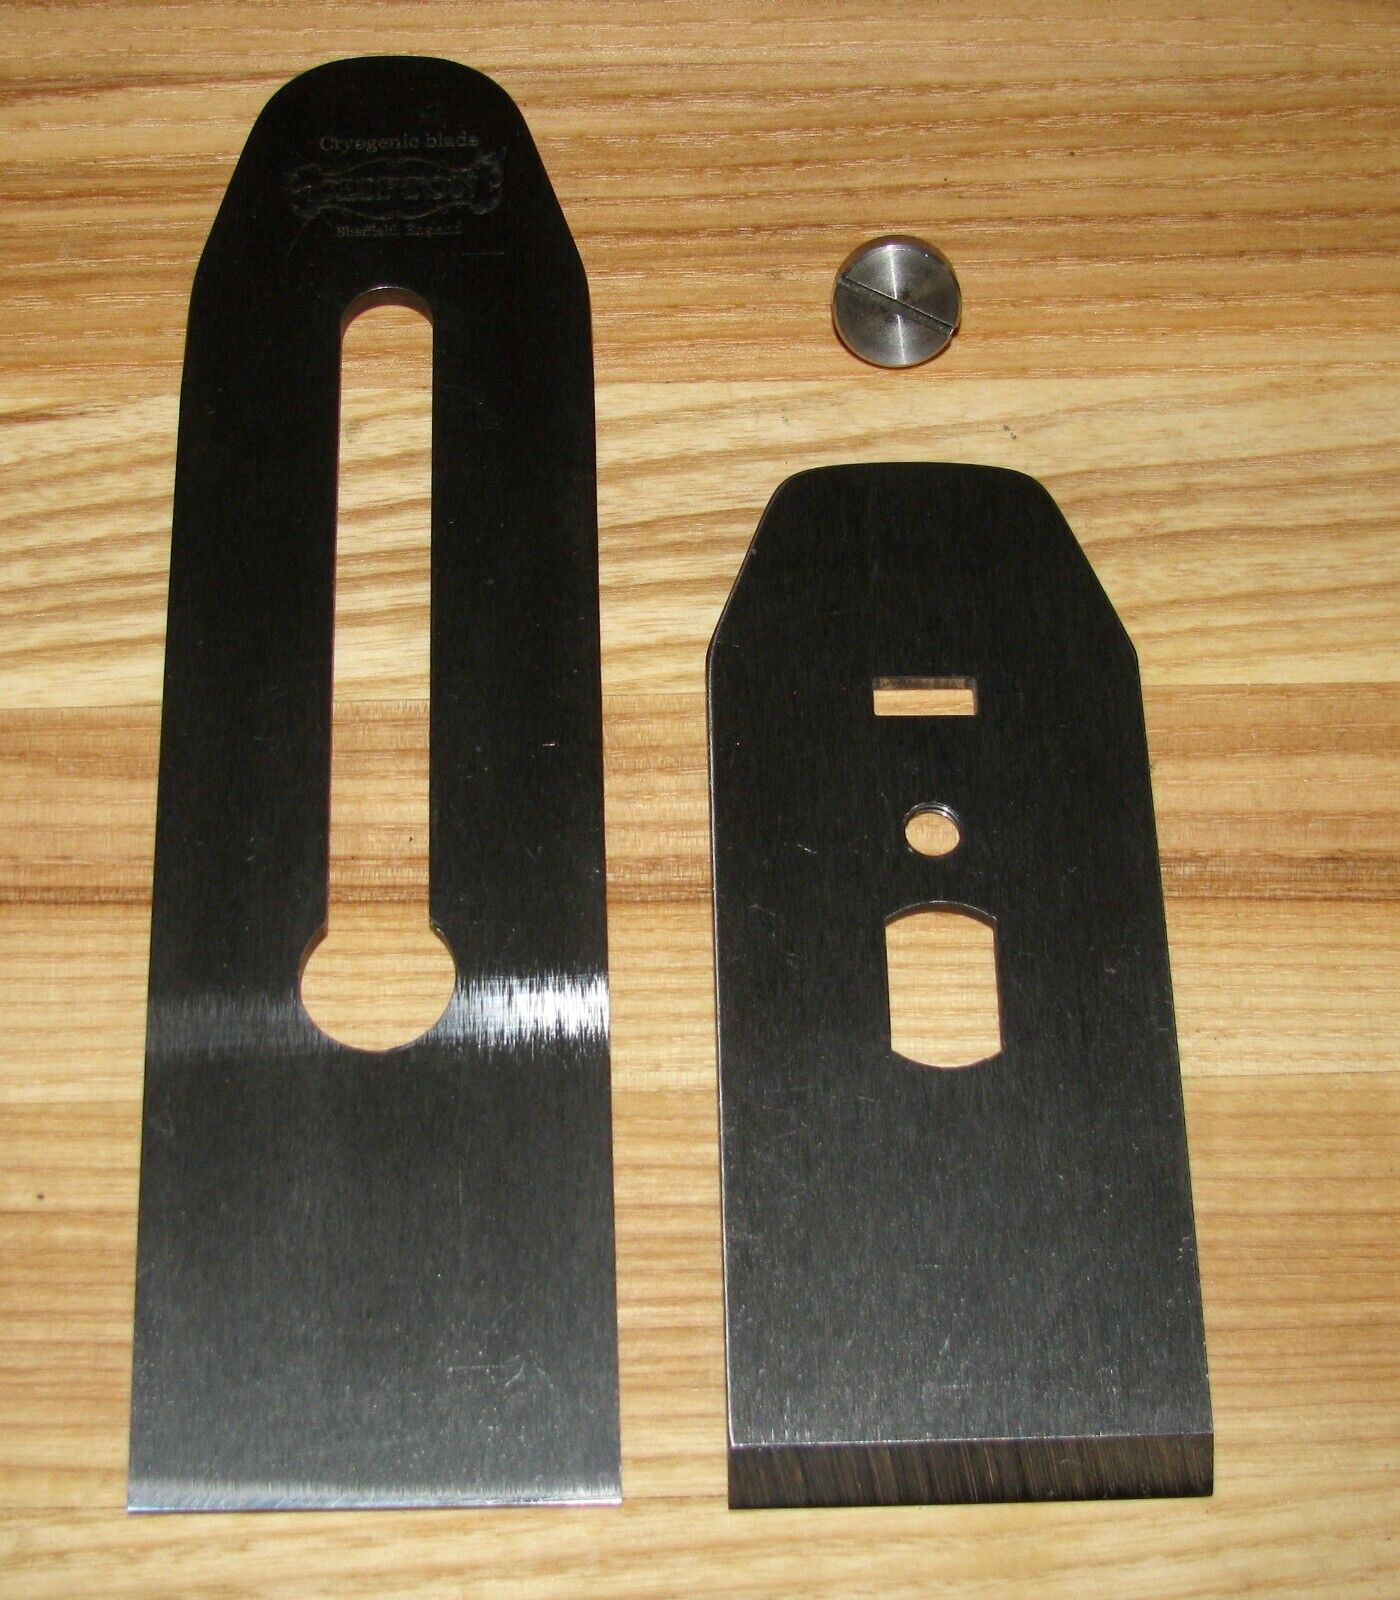 Clifton 2 inch plane iron and 2 inch chip breaker (cap iron)